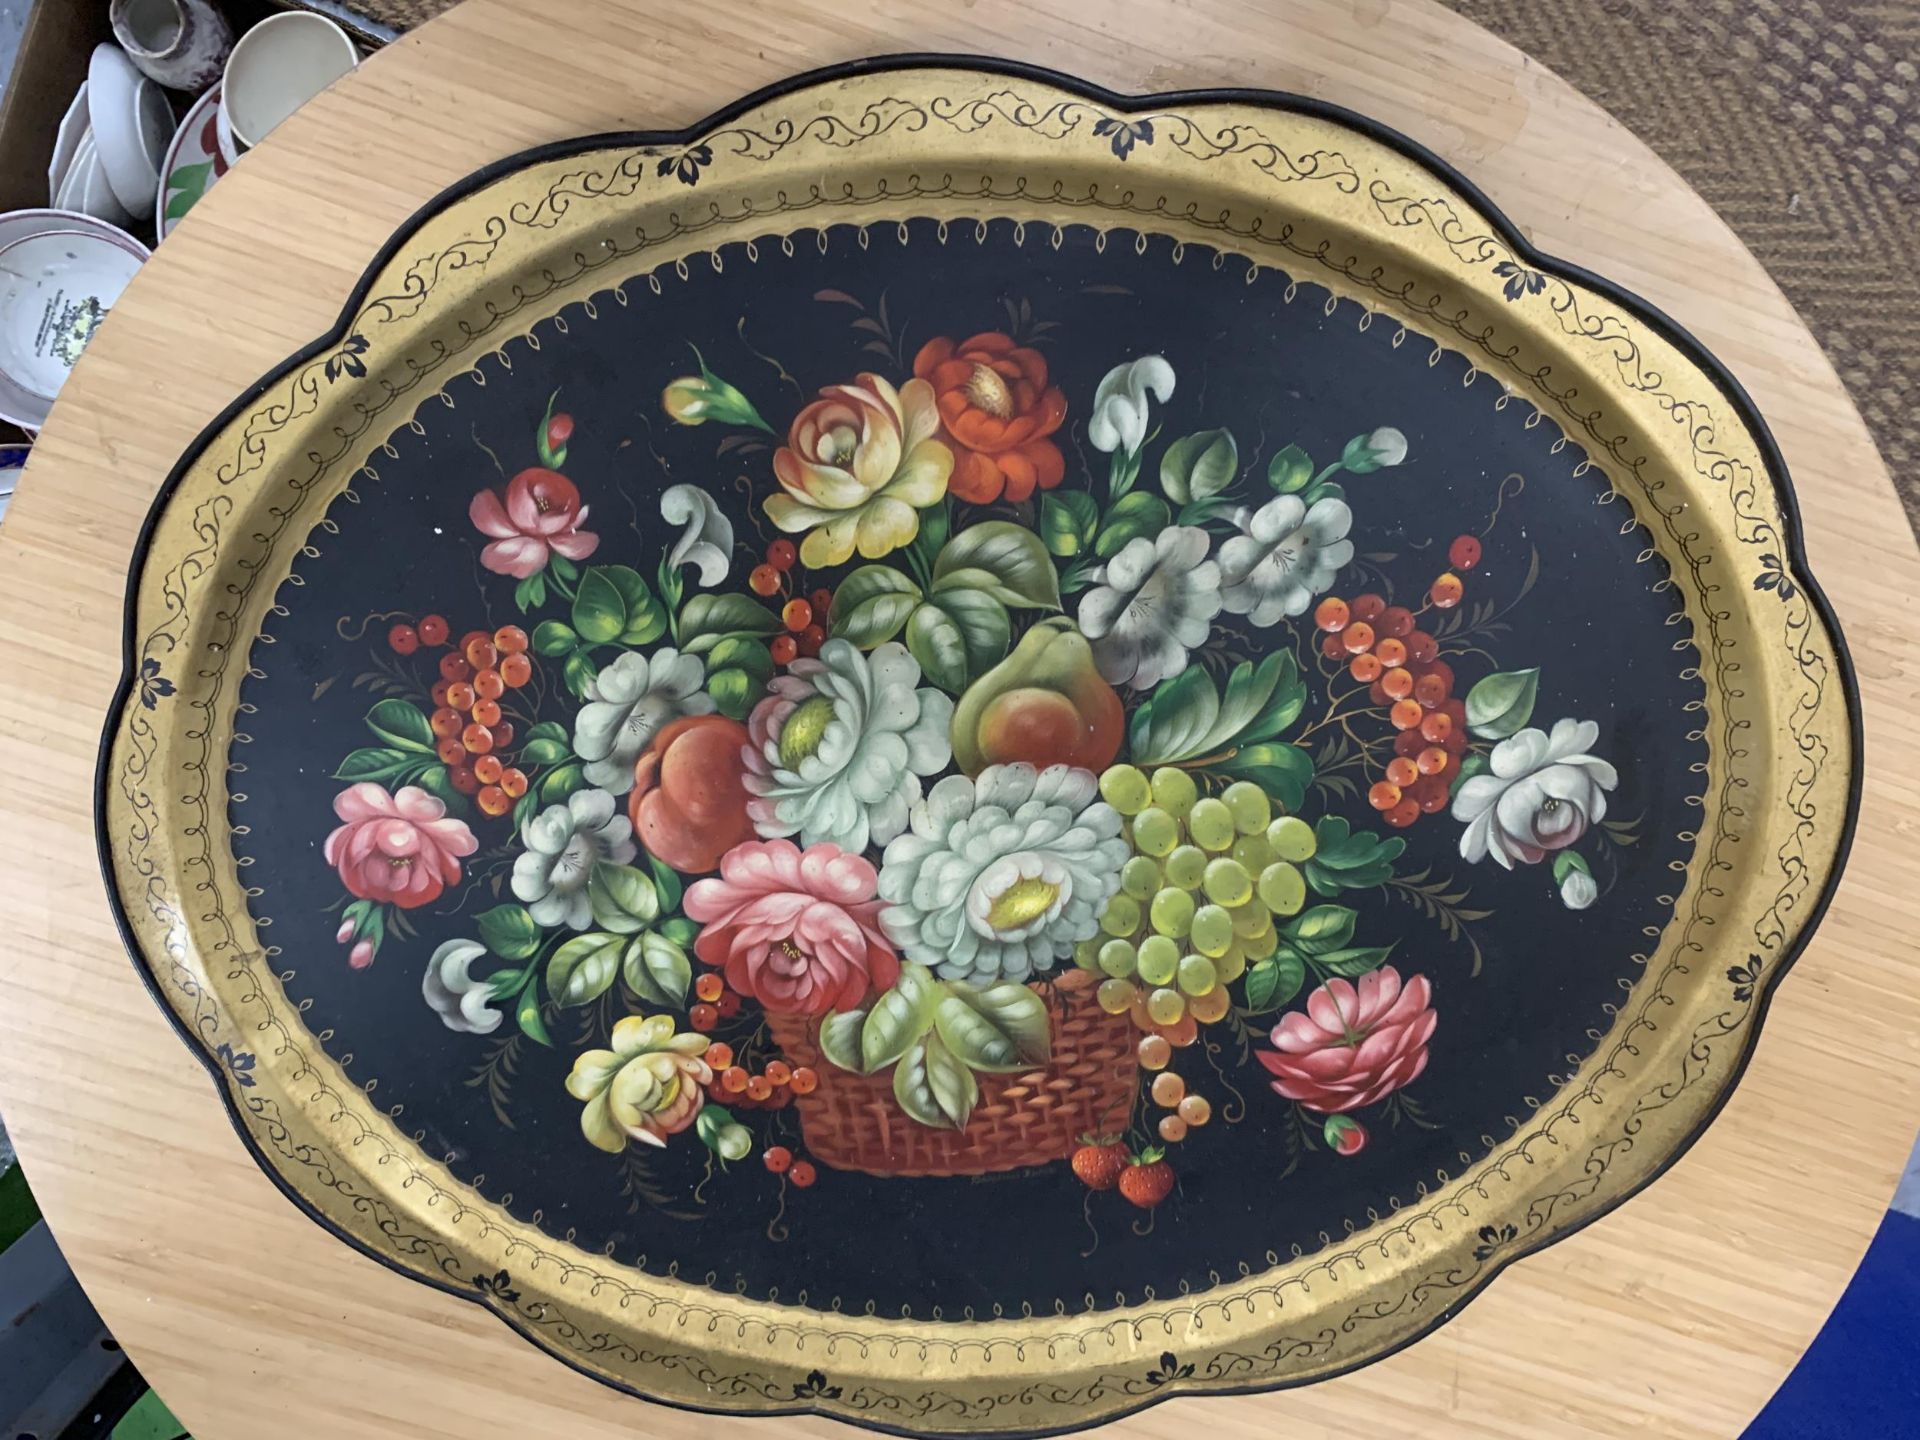 A LARGE DECORATIVE TOLEWARE TRAY, PAINTED ON STEEL SIGNED